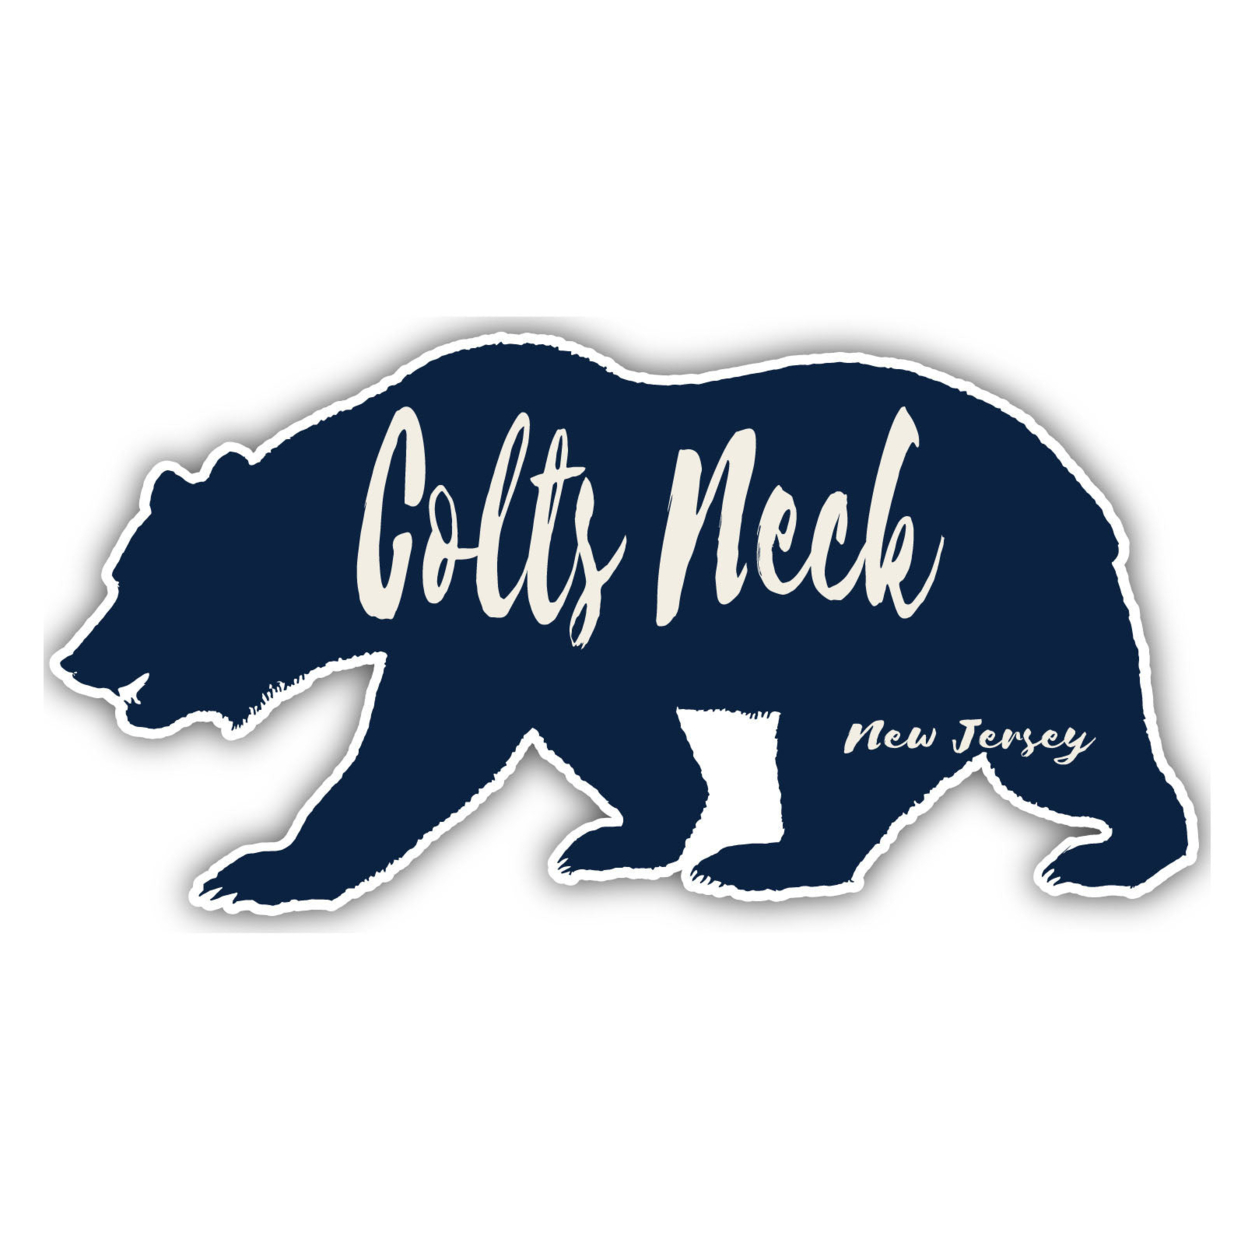 Colts Neck New Jersey Souvenir Decorative Stickers (Choose Theme And Size) - 4-Pack, 6-Inch, Bear